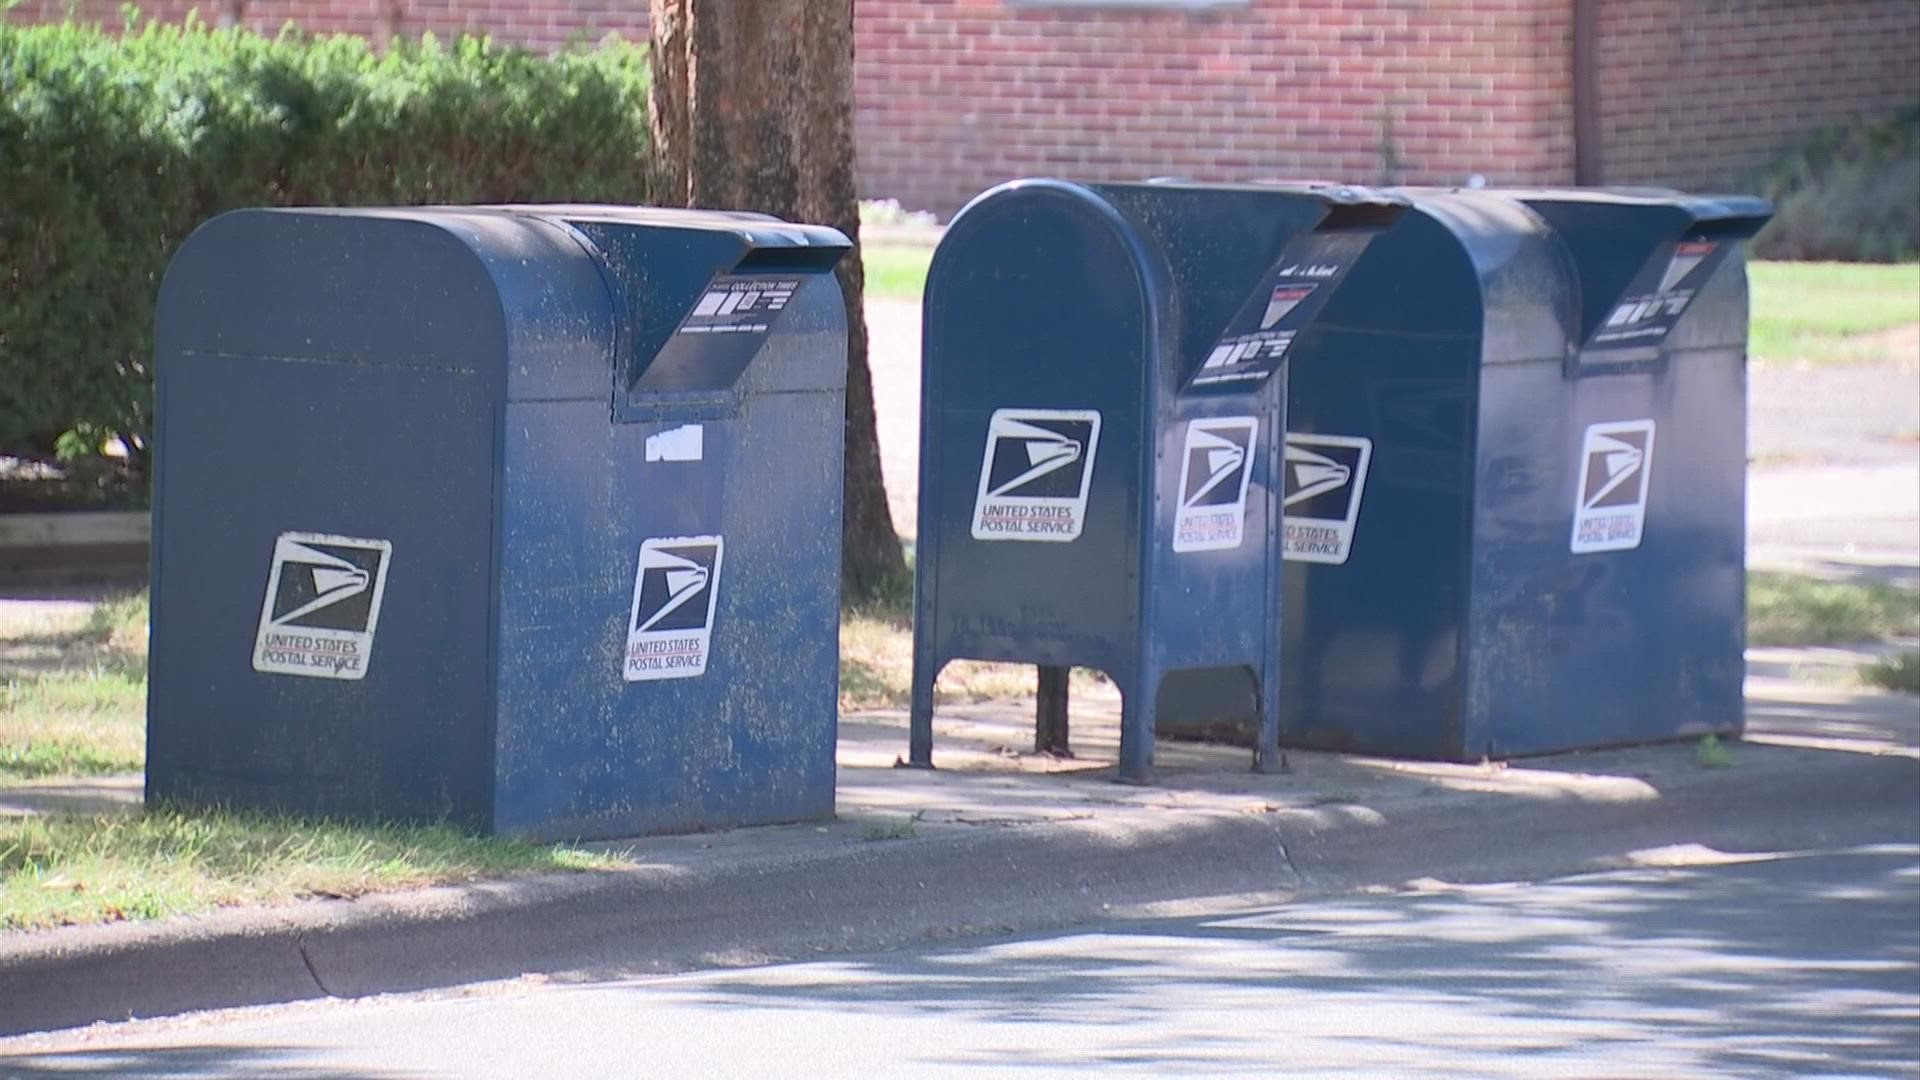 Thieves are stealing checks from the government mailboxes, forging them and then cashing them at area banks.